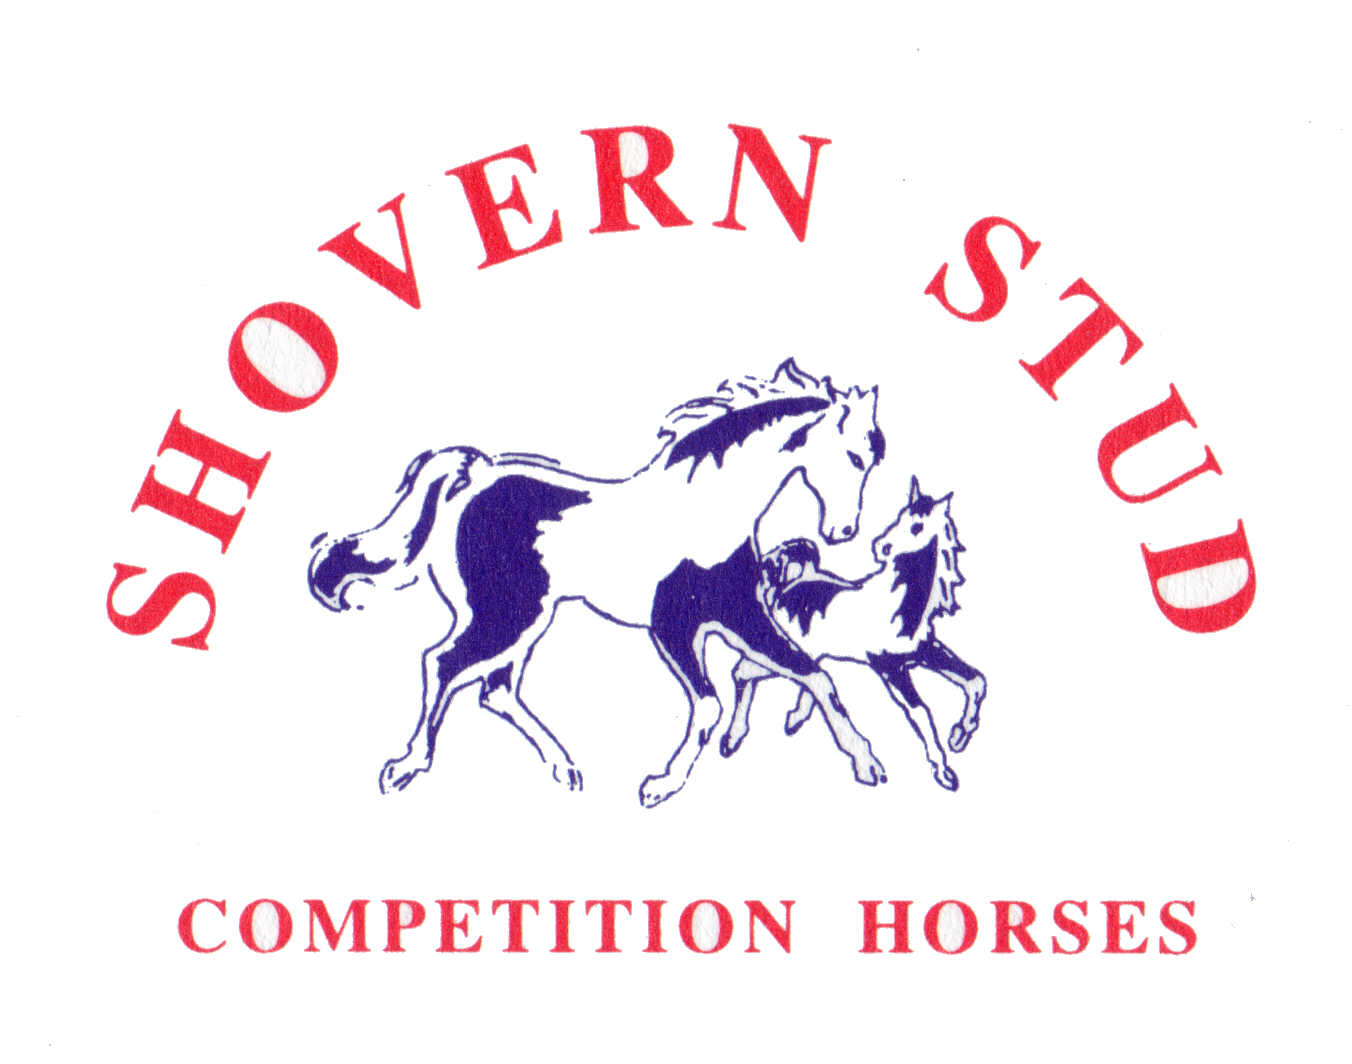 Shovern Stud Picture Page.